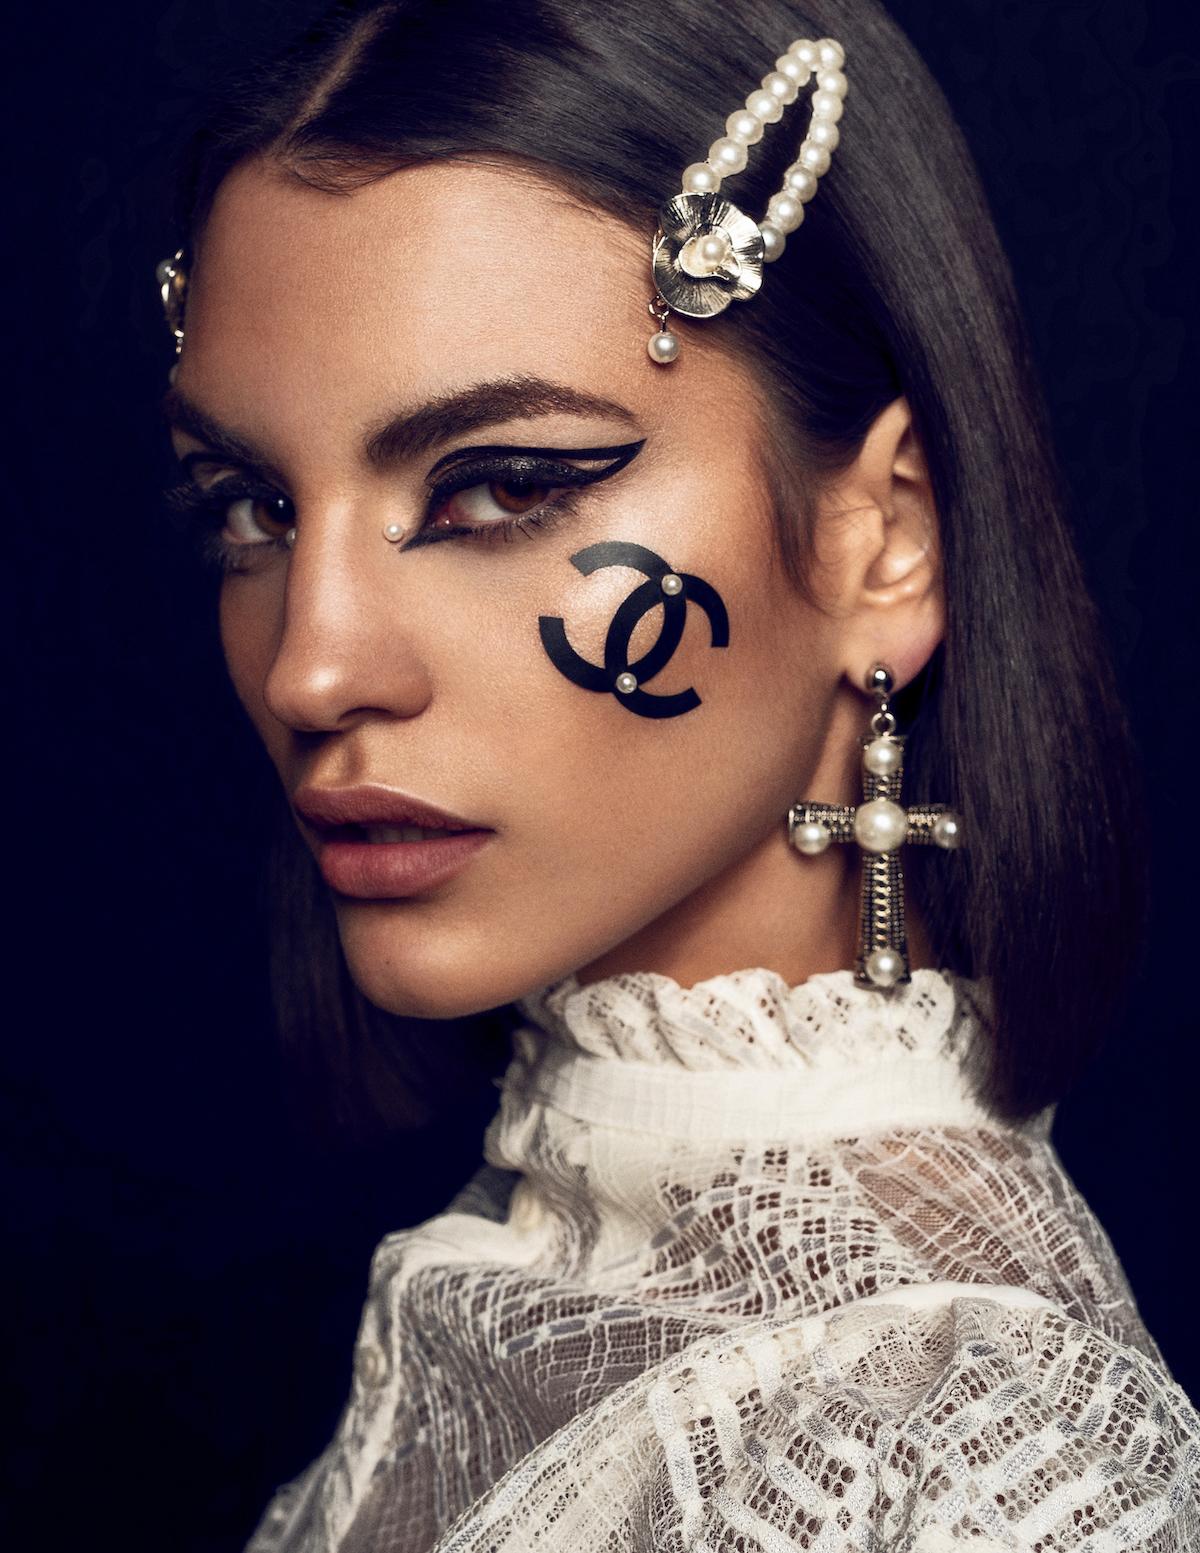 An unusual make-up idea for using your favorite fashion brand. Here used Chanel